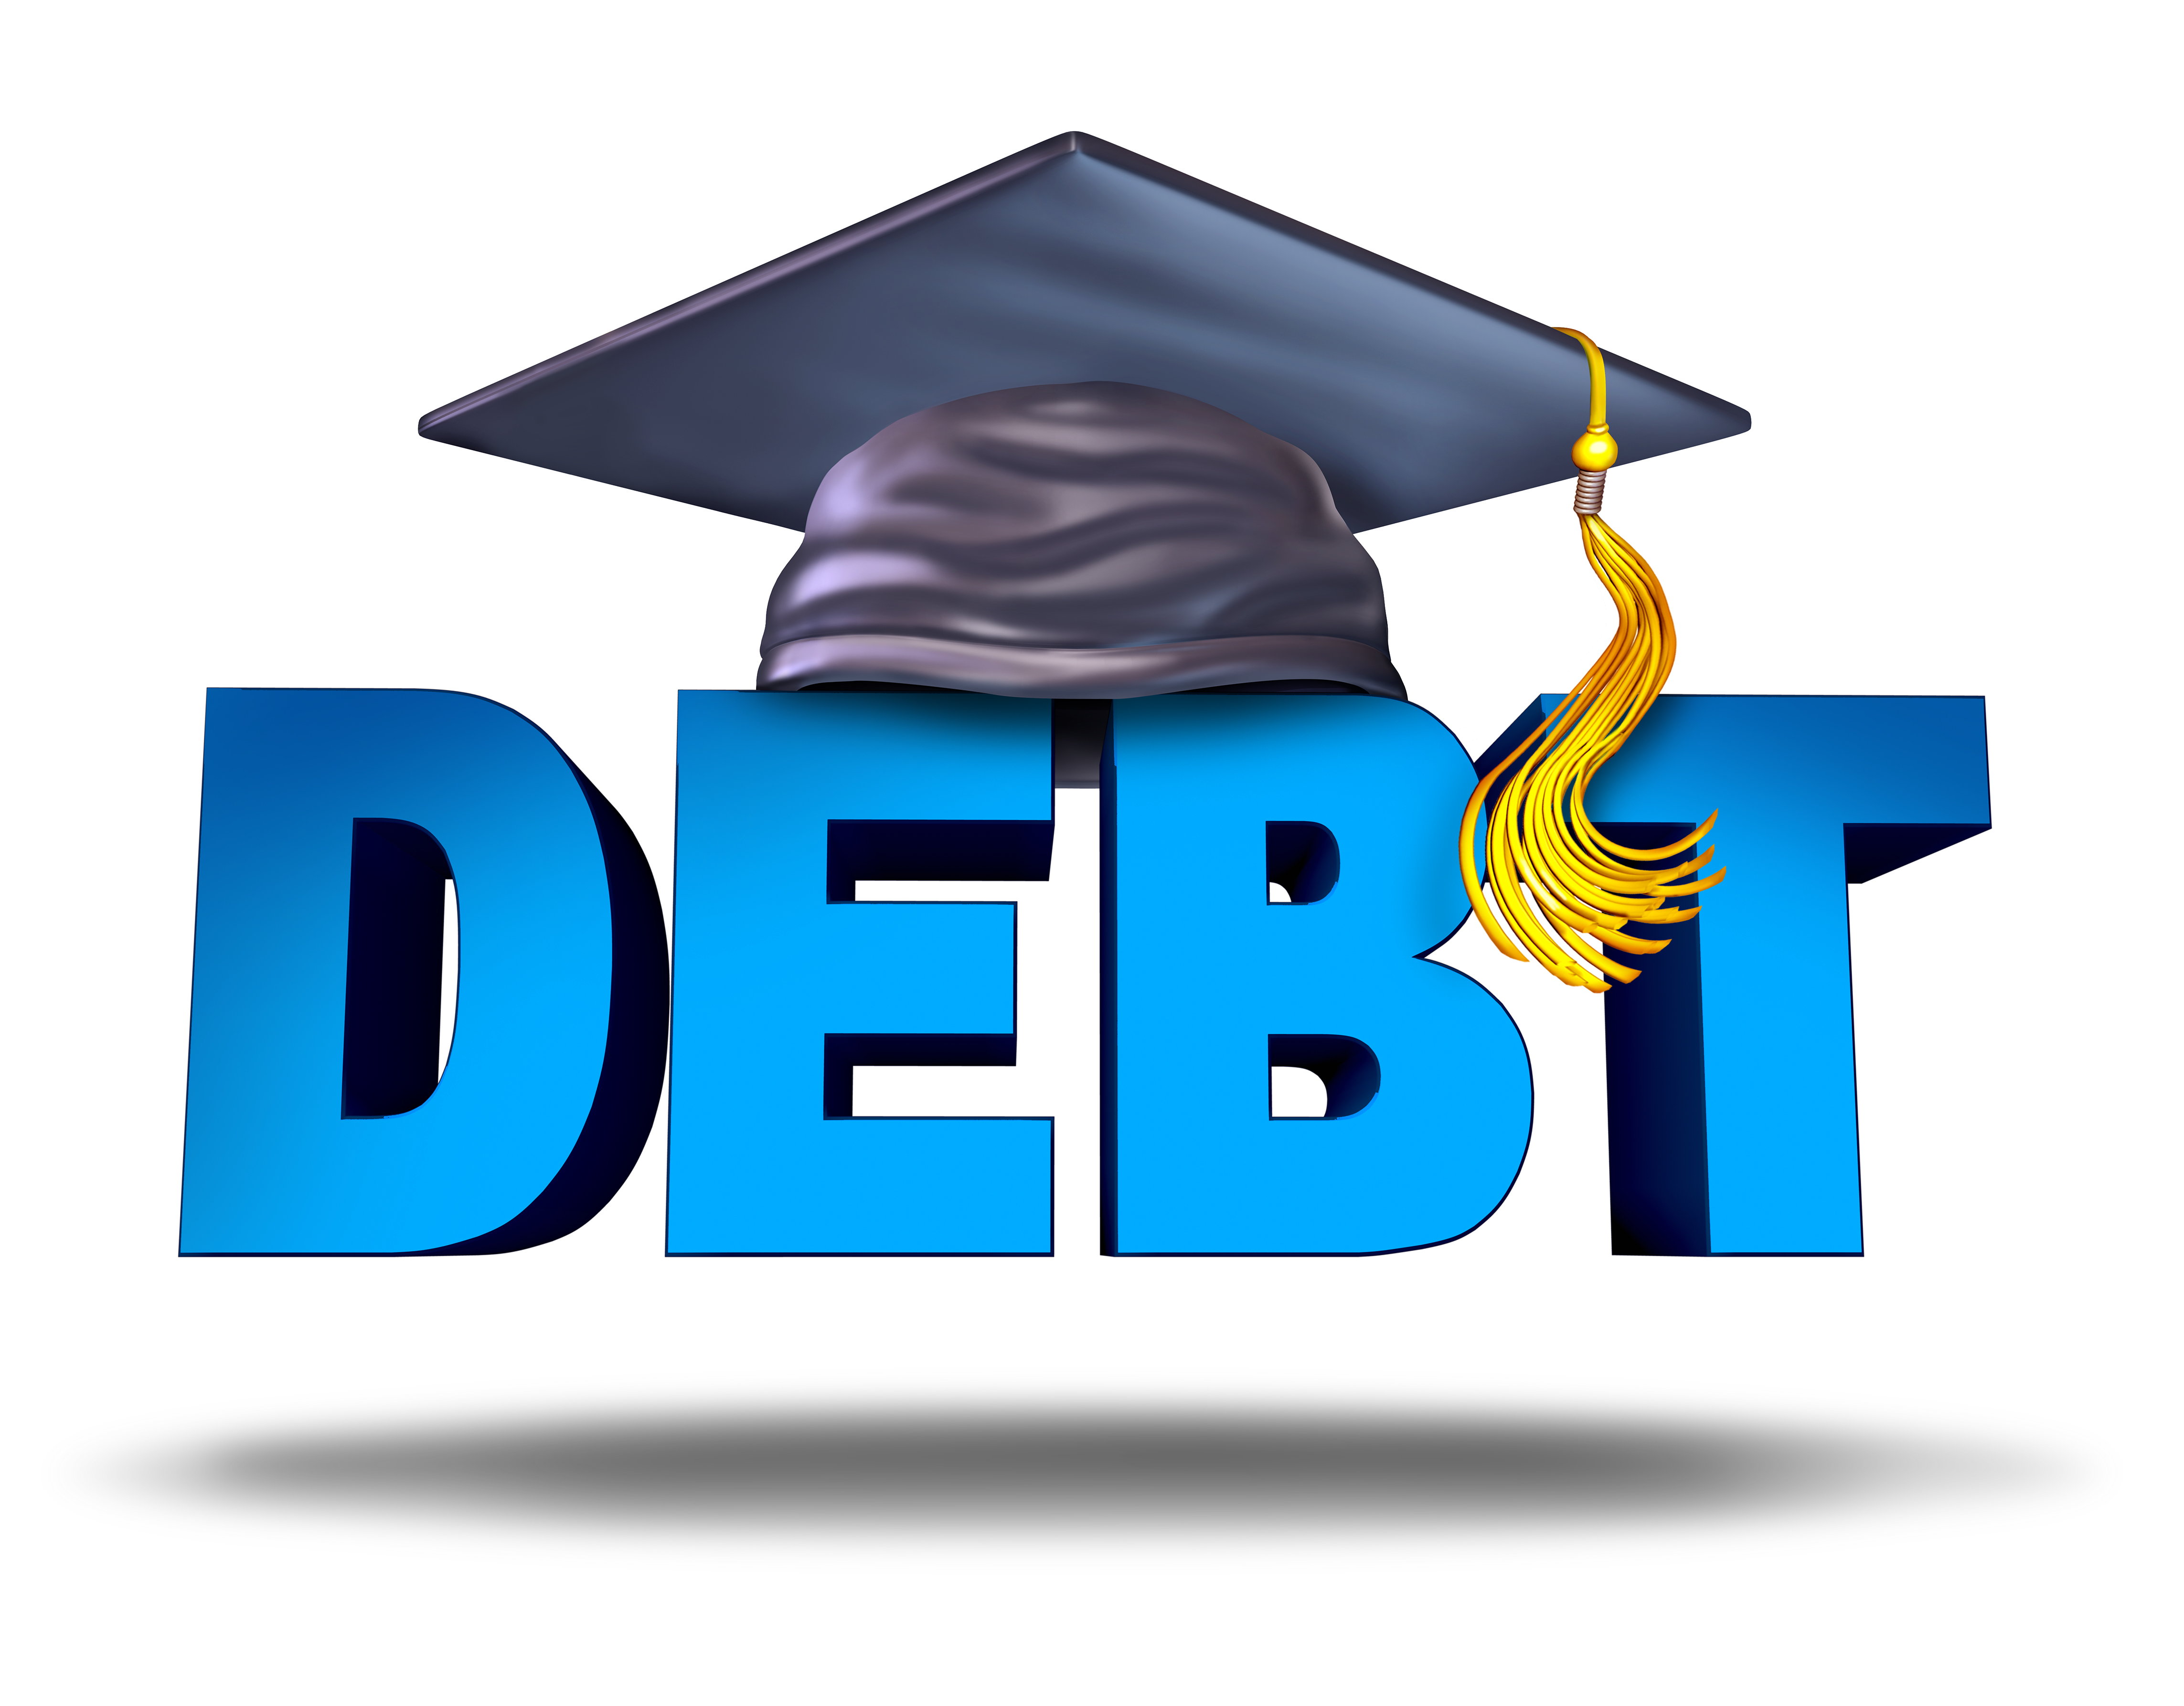 Get Student Debt Help From National Student Aid Care. Call Us At 888-350-7549